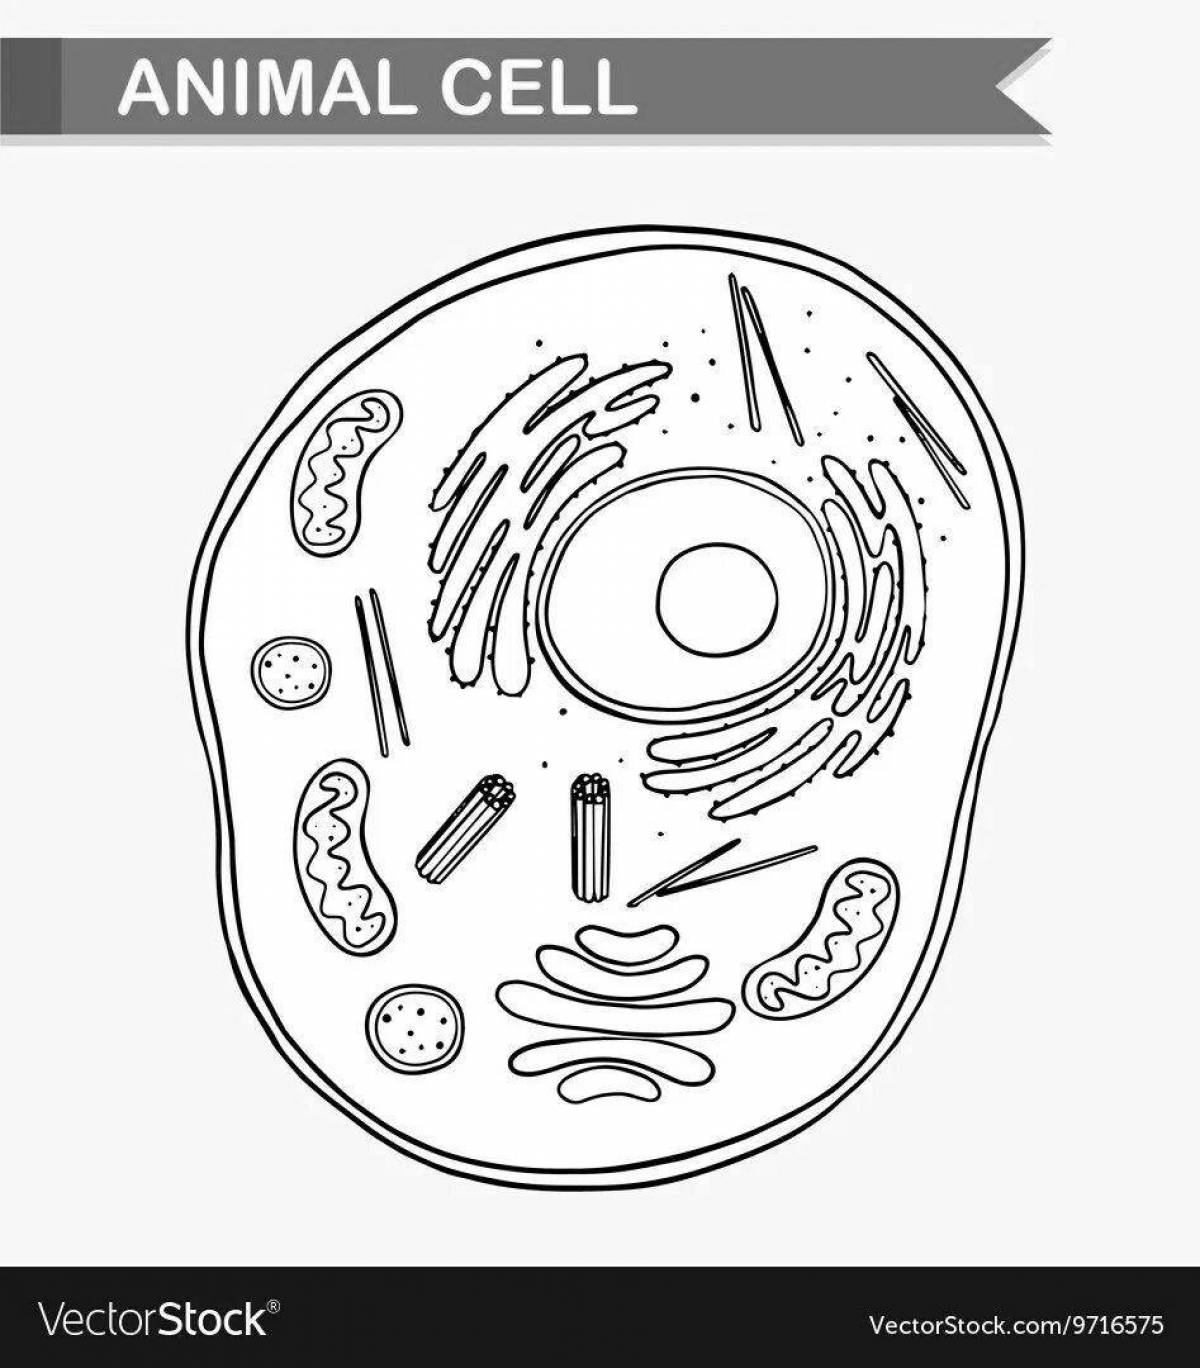 Detailed plant cell coloring page